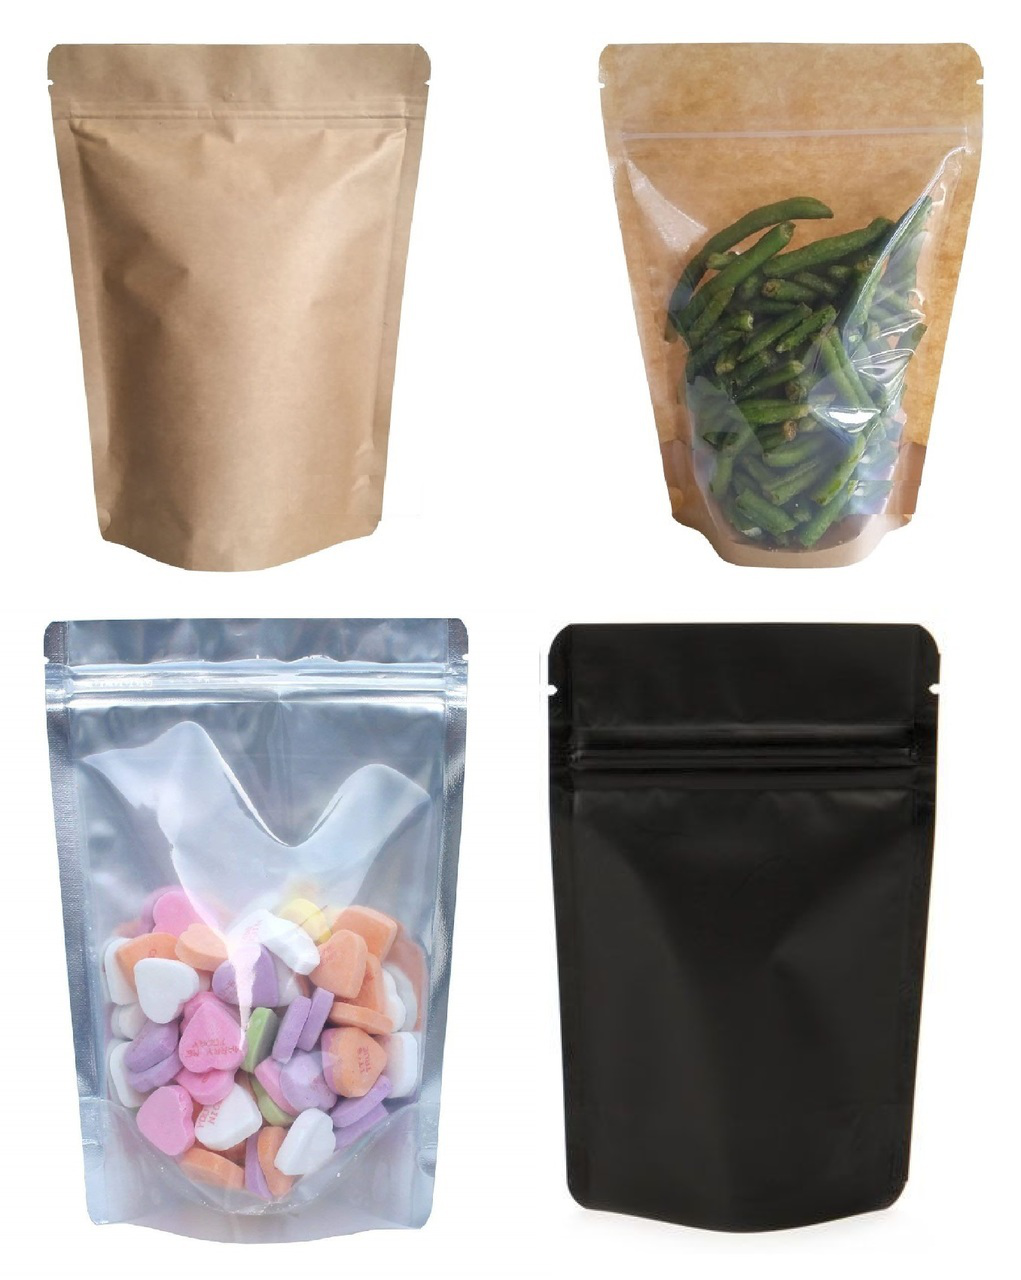 Why People Choose Smell Proof Bags Over Glass Containers